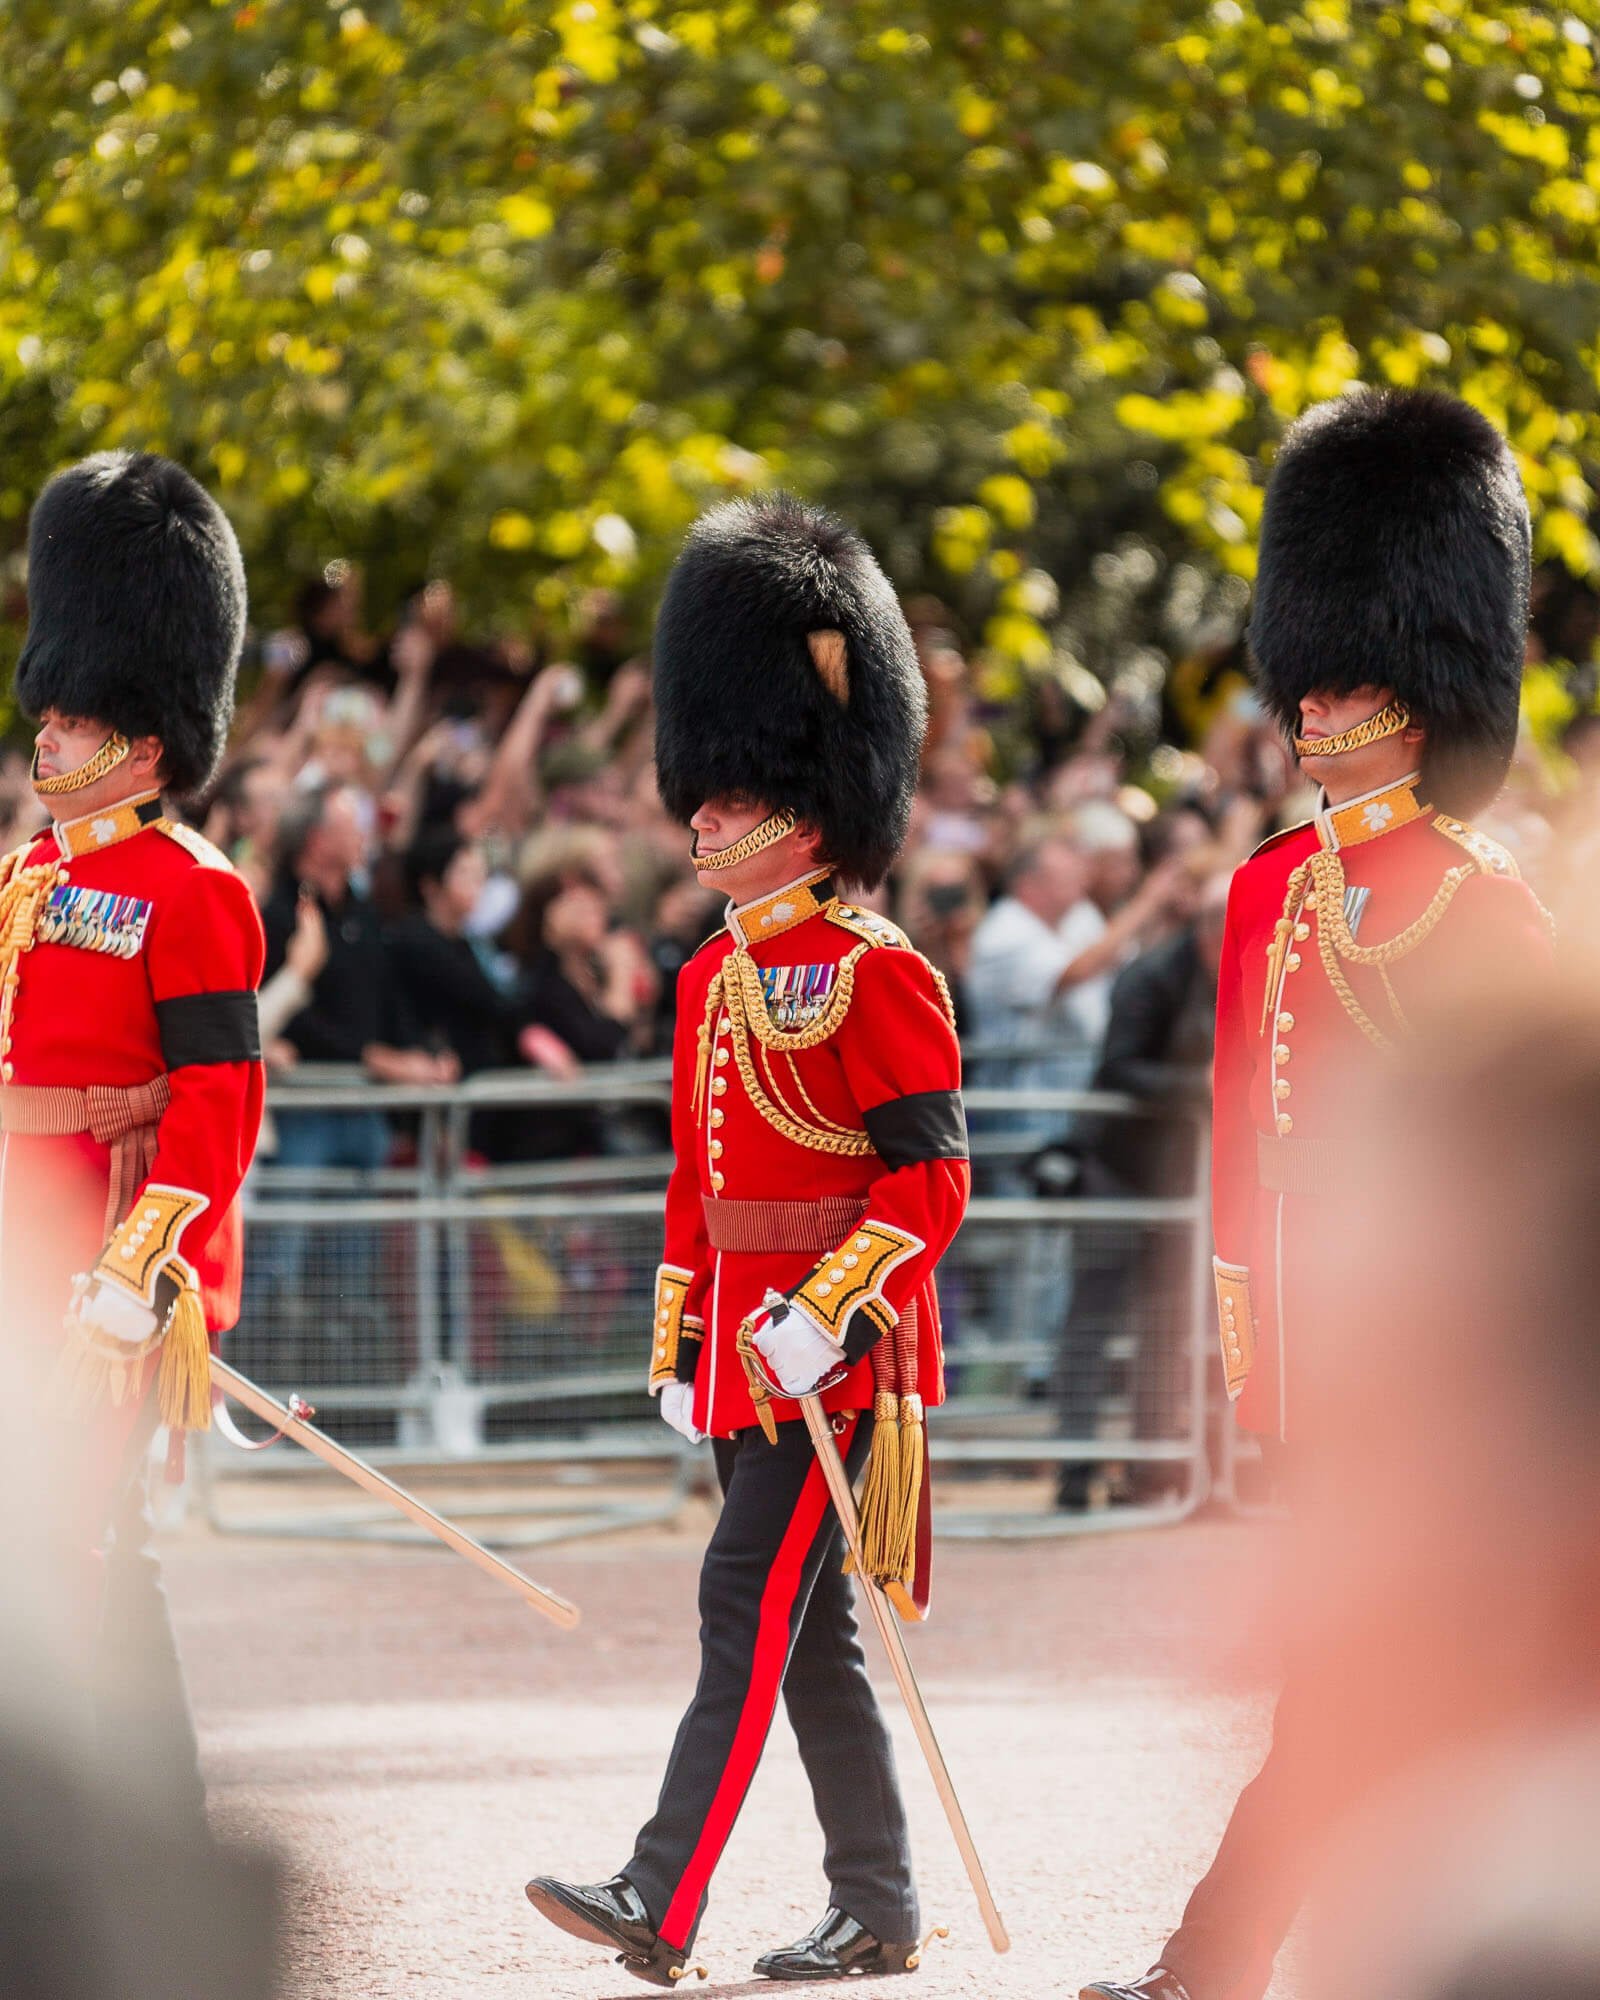 What to see in London: don’t miss a tour of Buckingham Palace